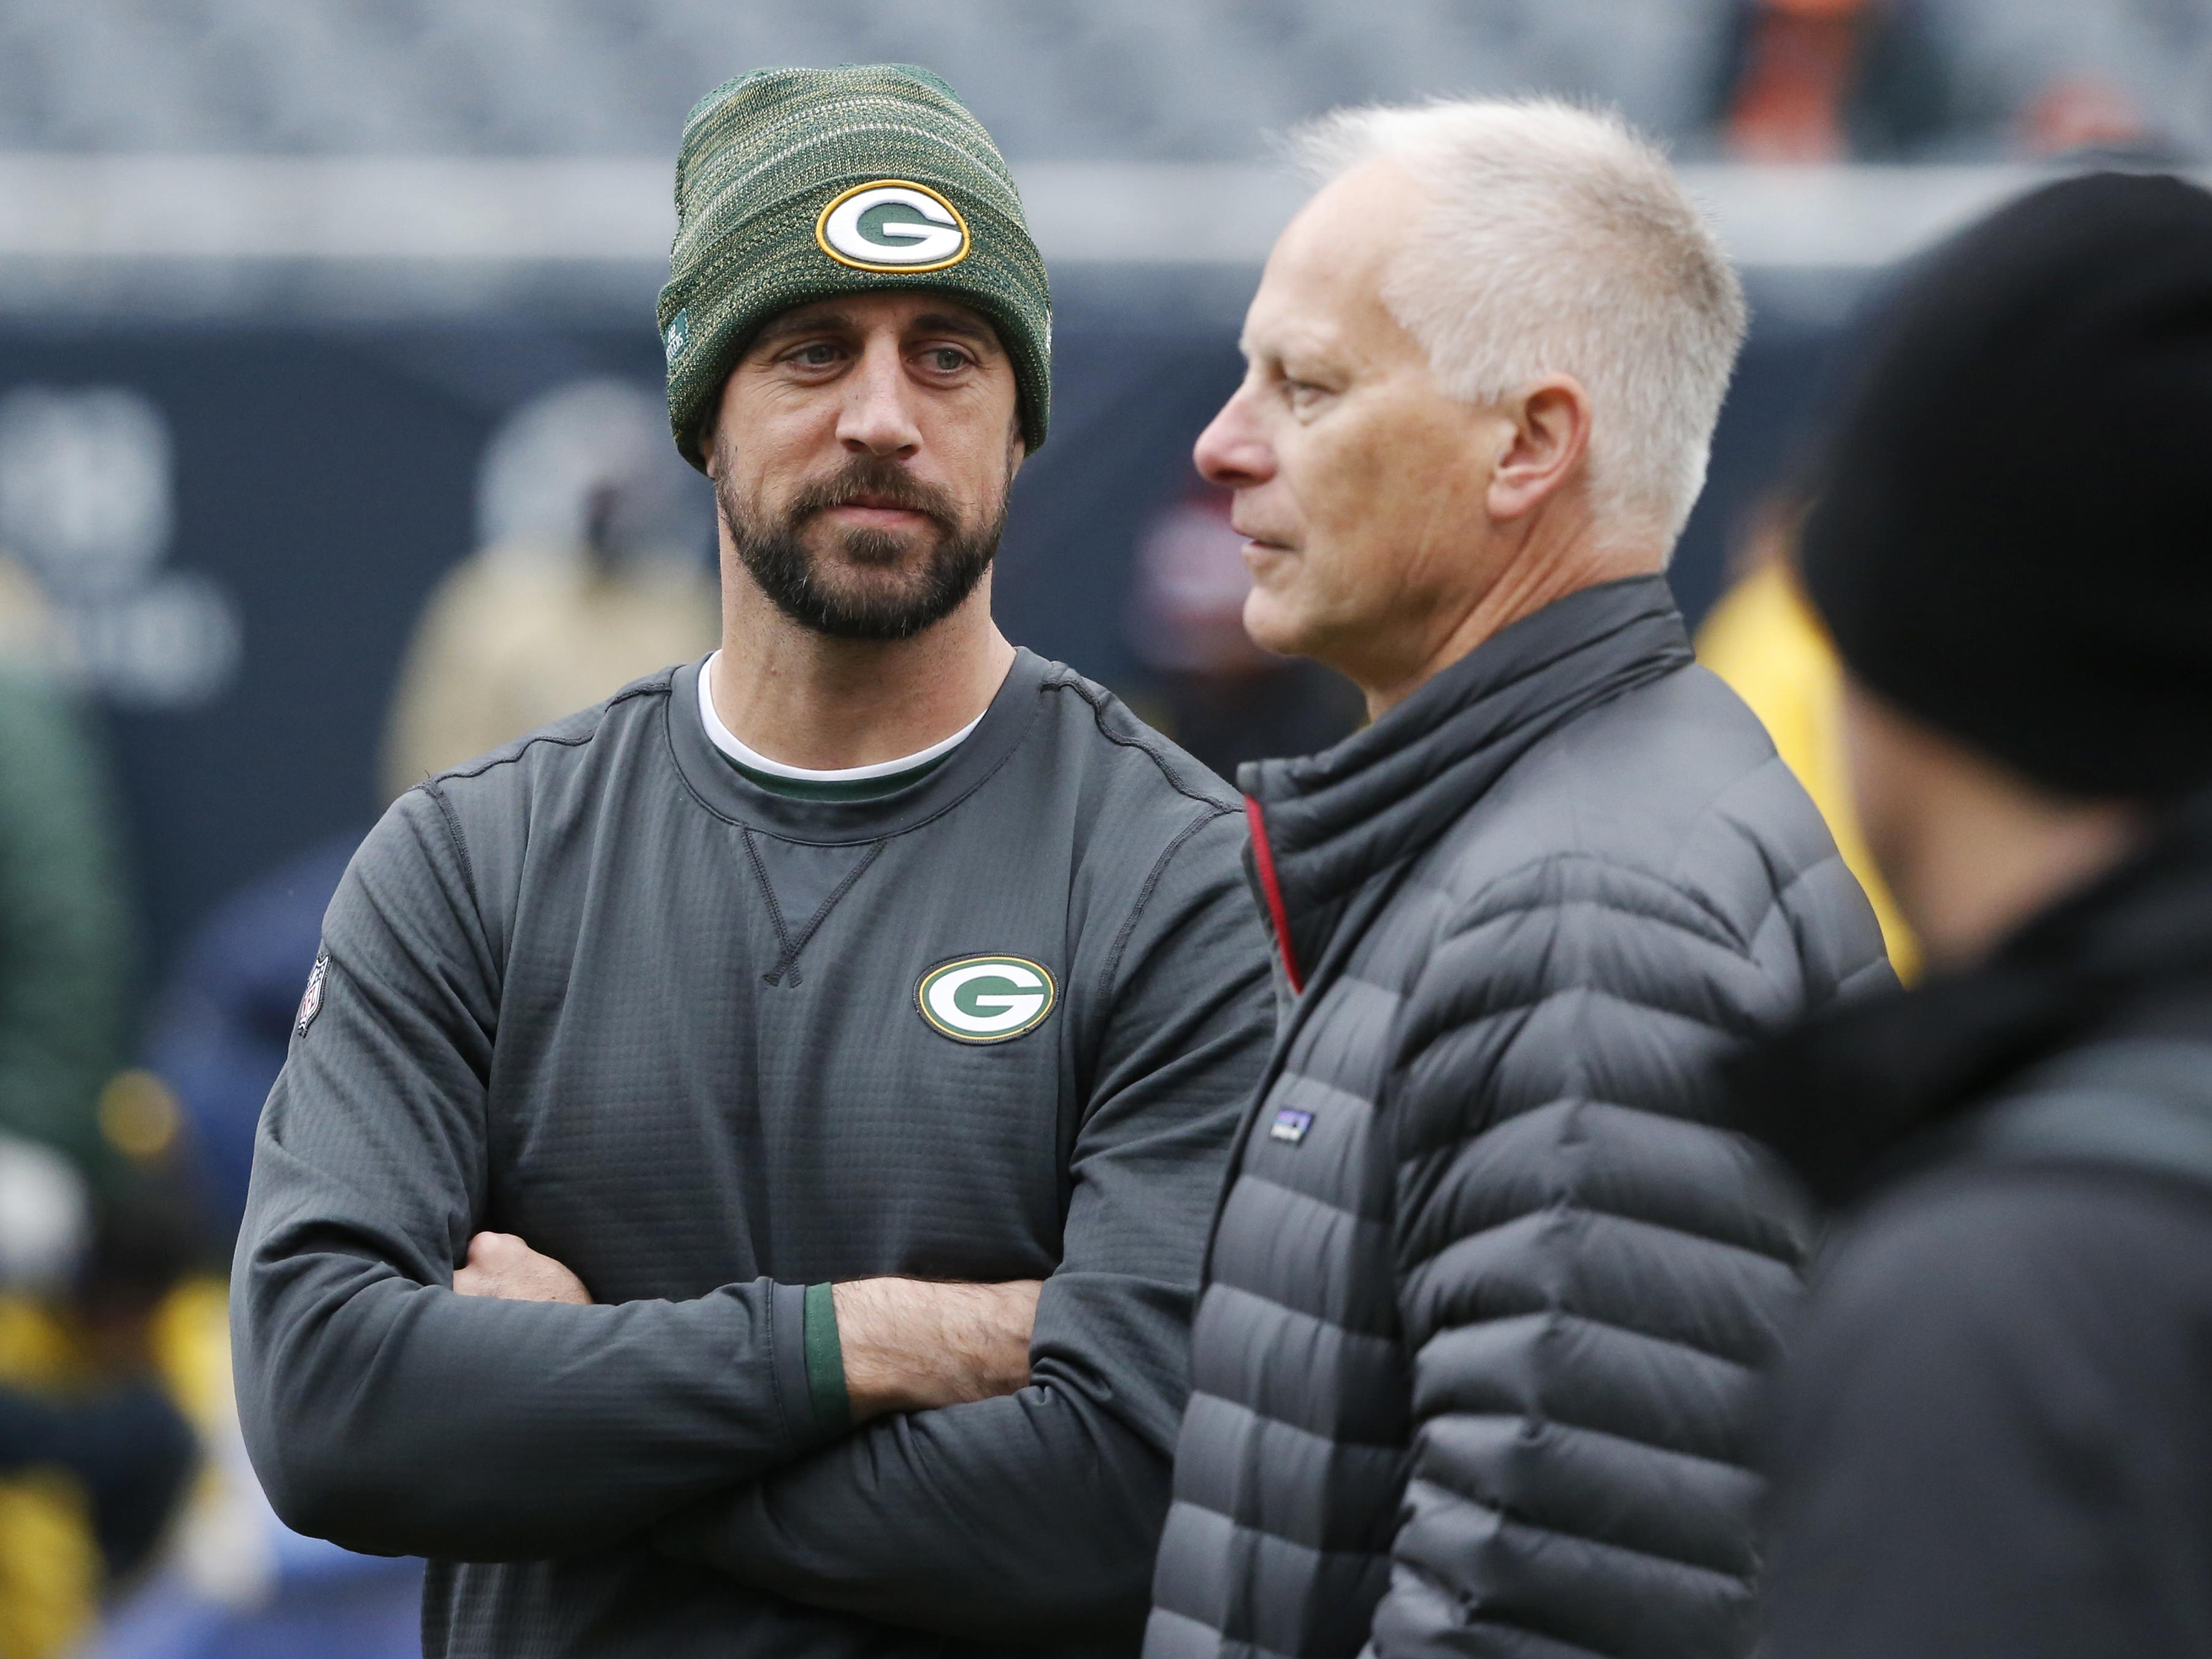 ESPN on X: The Packers lose in Washington! It's Green Bay's first